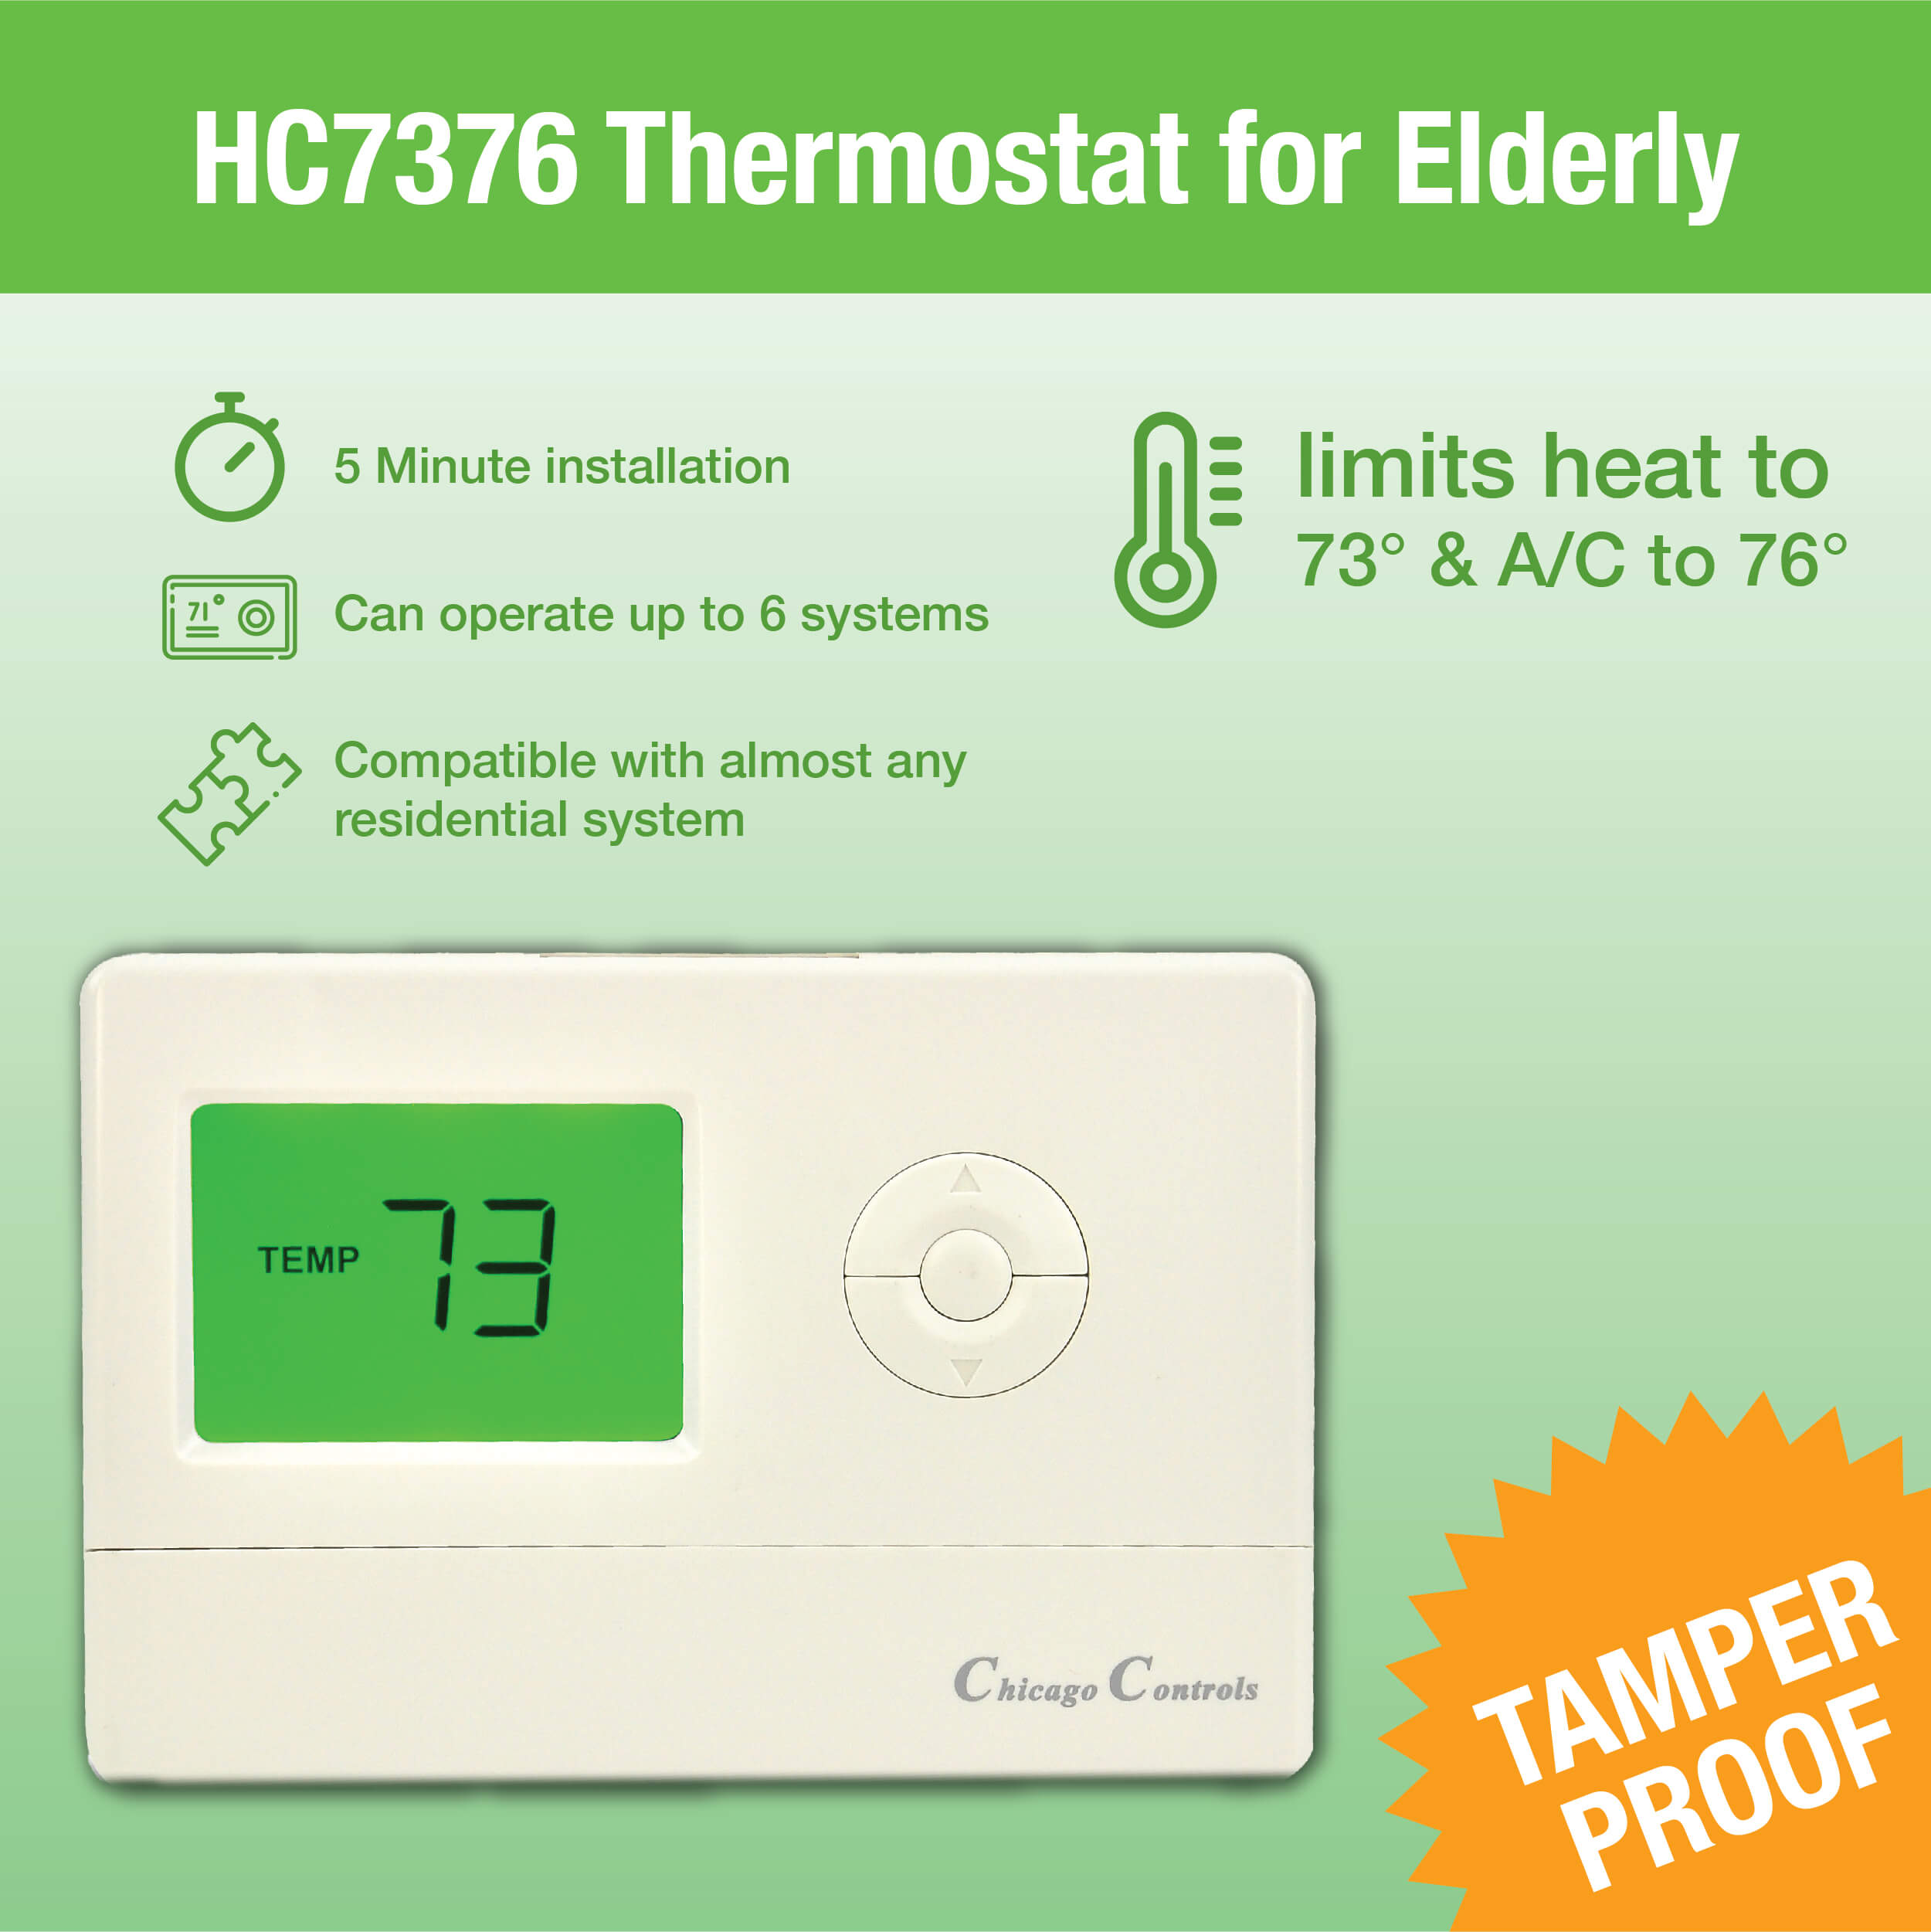 An overview of the Thermostat for Elderly that includes temperature ranges and basic installation information.